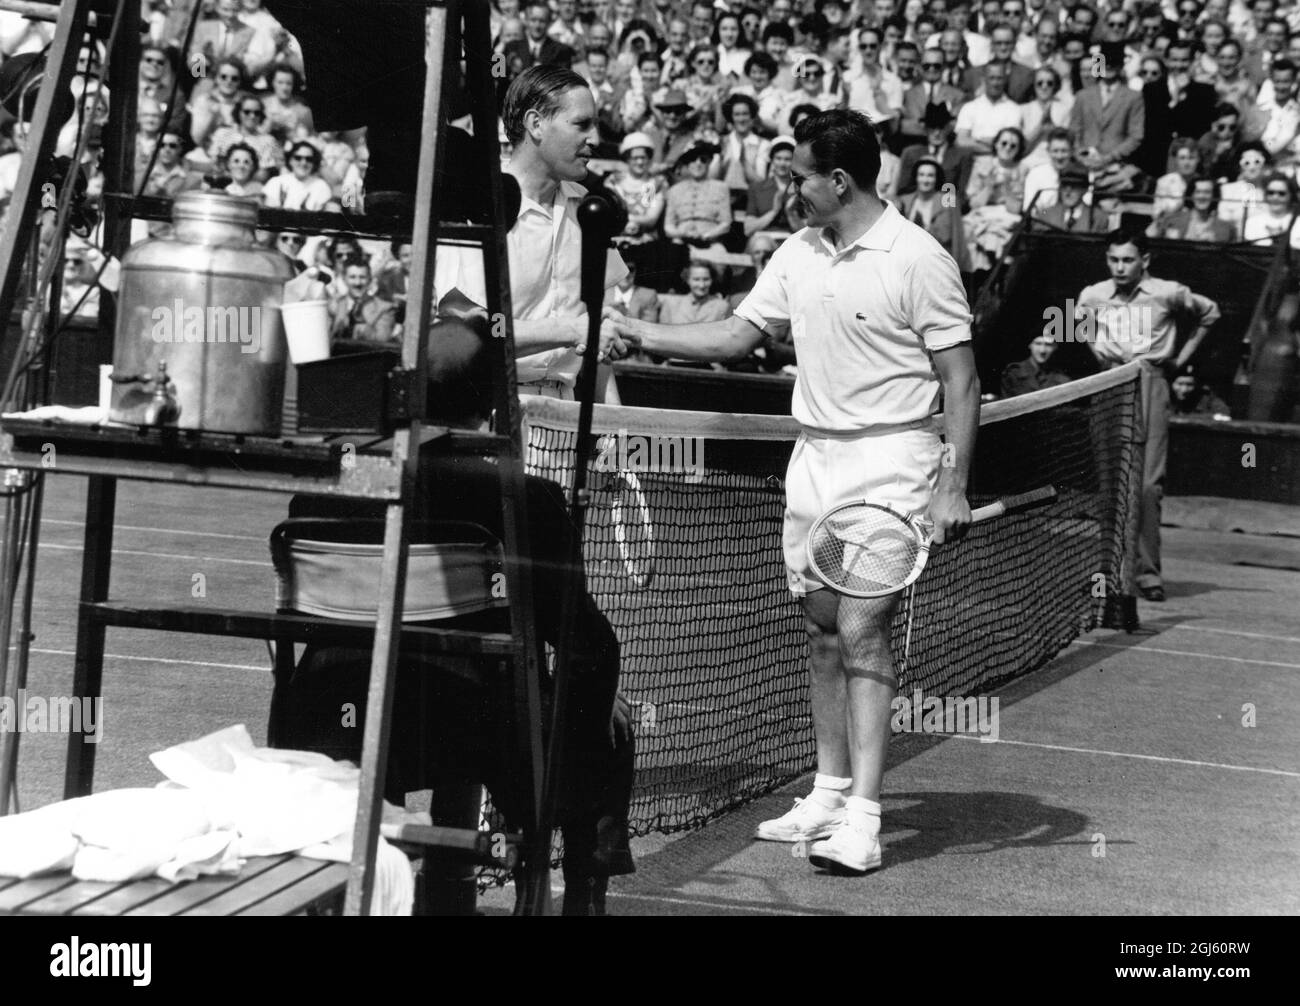 Gottfried von Cramm shakes hands with J Drobny (right) after their match in the Wimbledon Tennis Championships 25 June 1951 Stock Photo